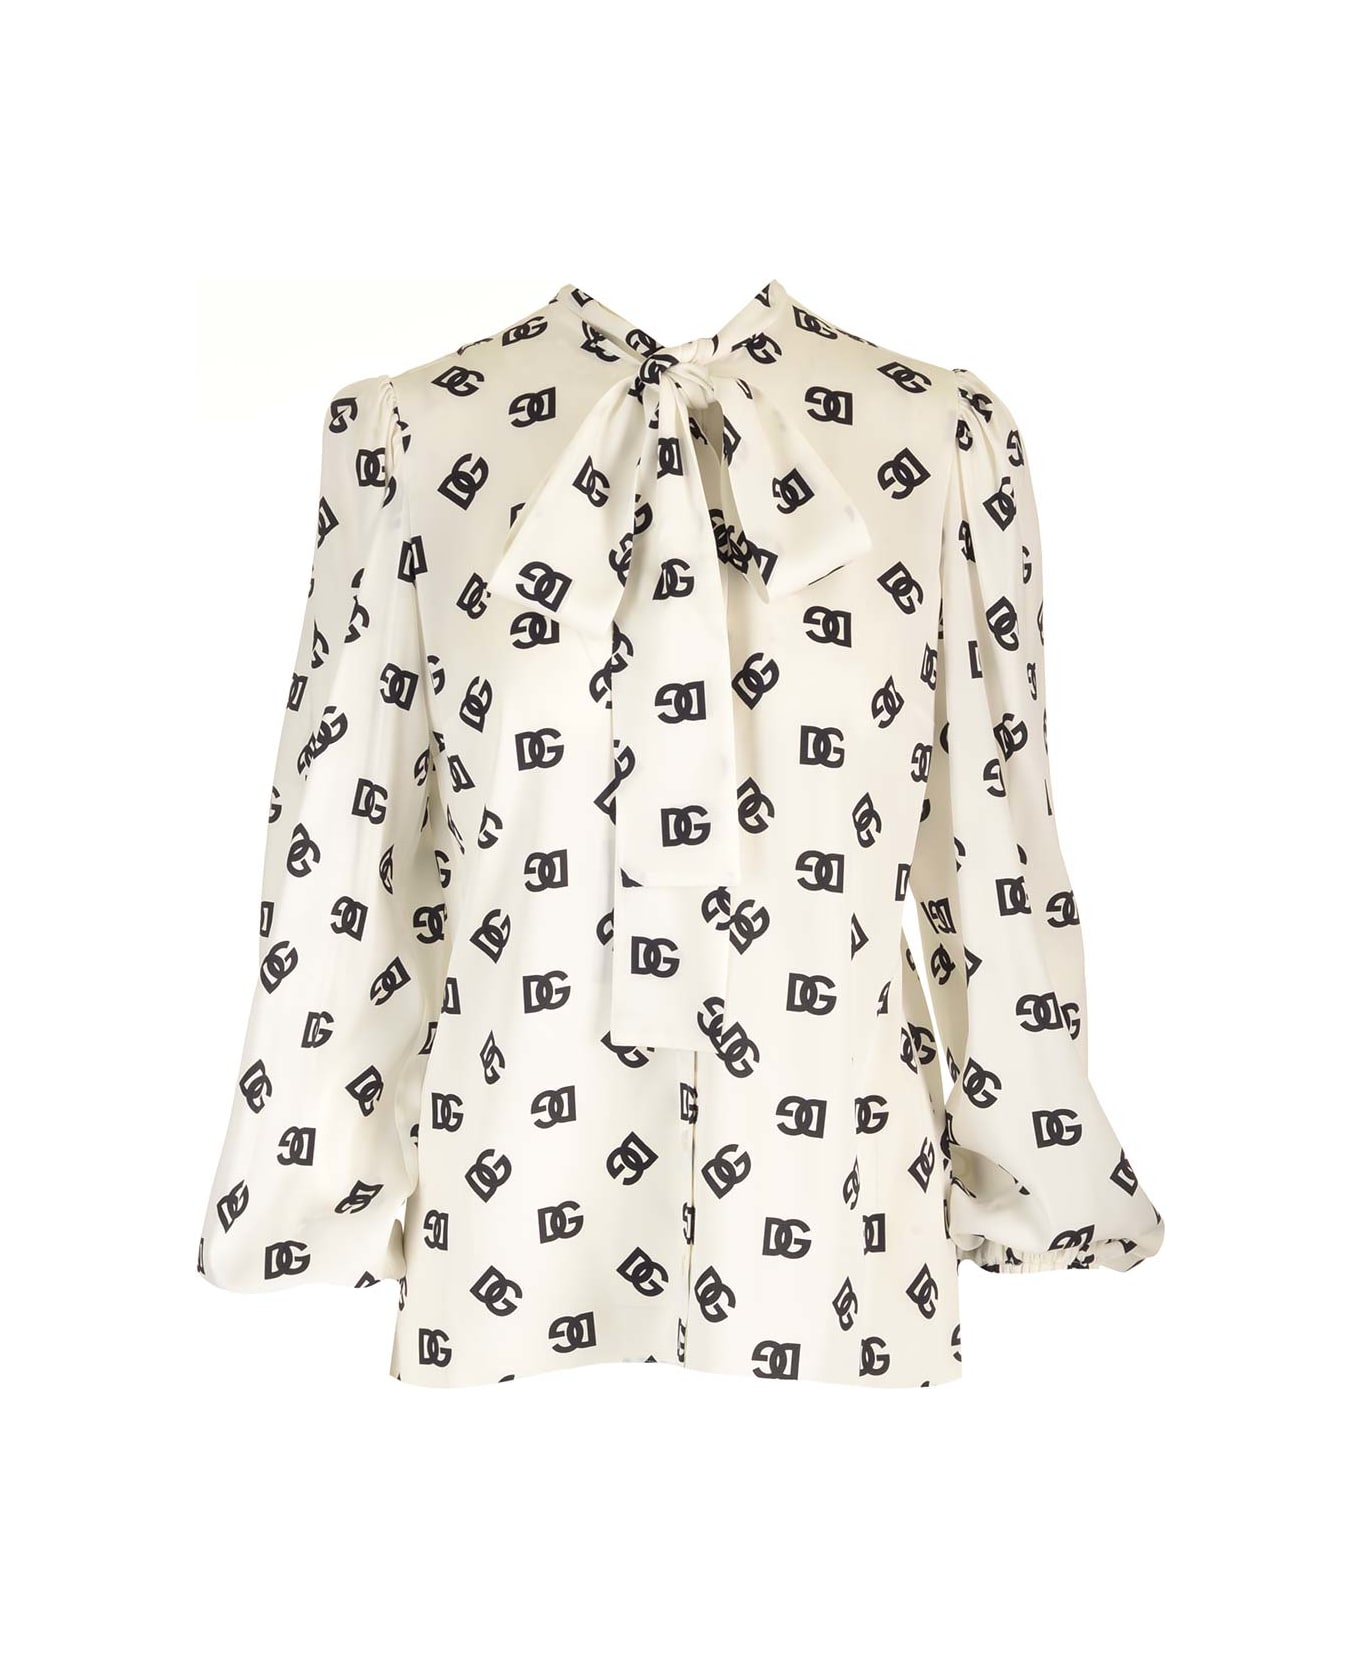 Dolce & Gabbana Shirt With All-over Dg Print - White